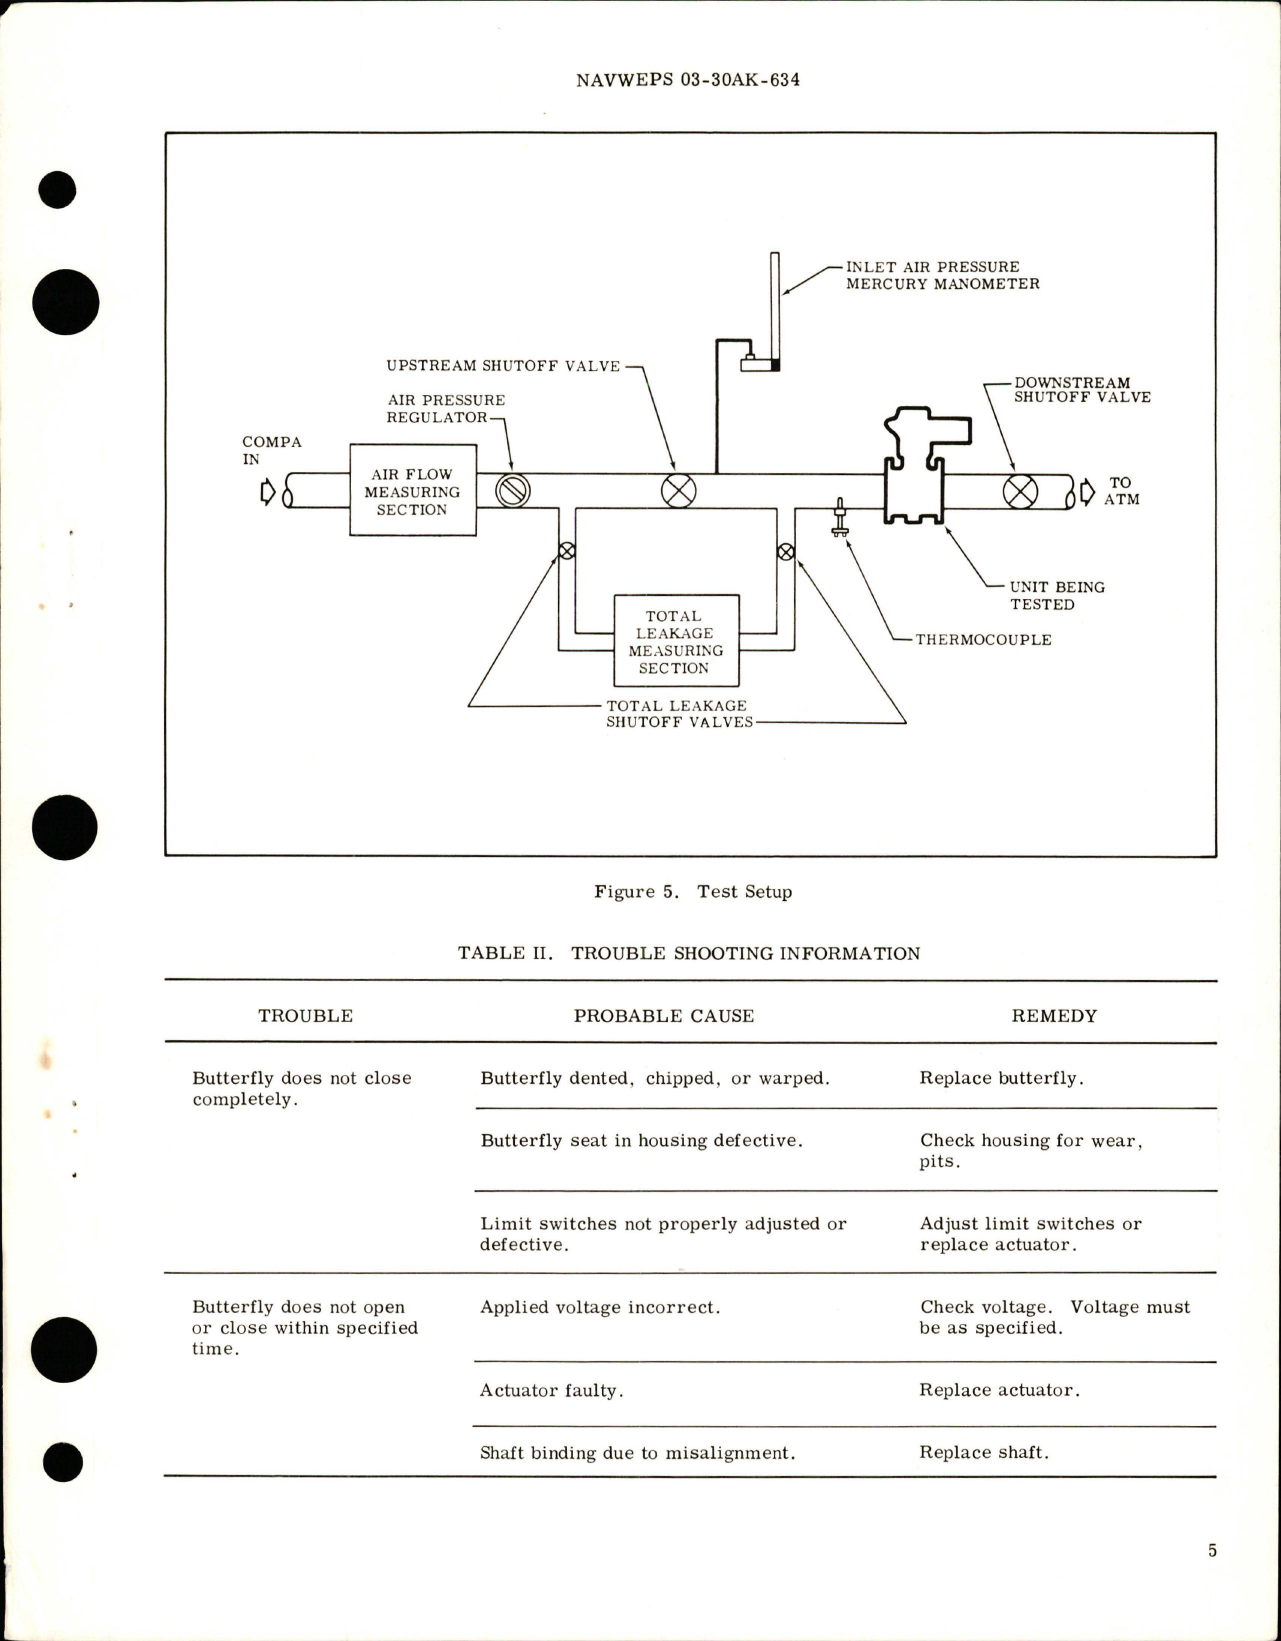 Sample page 5 from AirCorps Library document: Overhaul Instructions with Parts Breakdown for Modulating Air Shutoff Valve - Part 104012-1, SR2